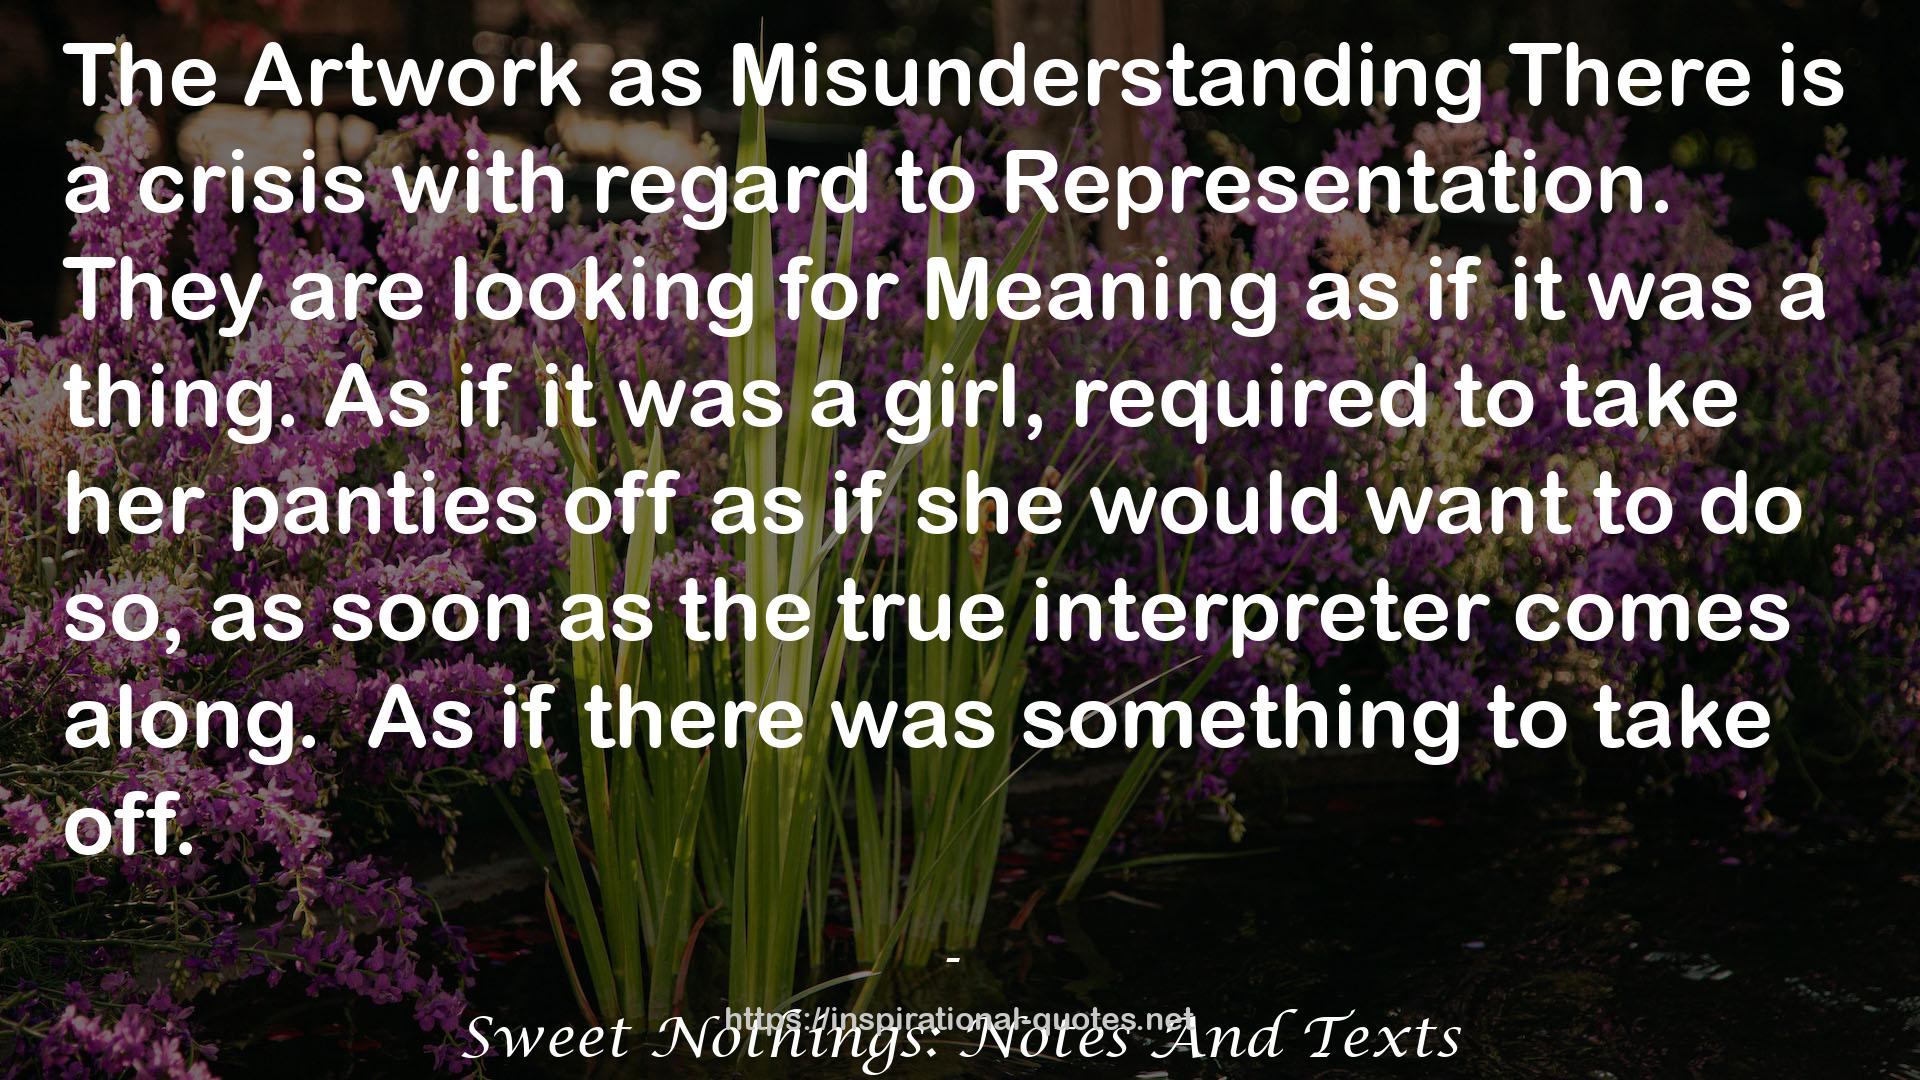 Sweet Nothings: Notes And Texts QUOTES